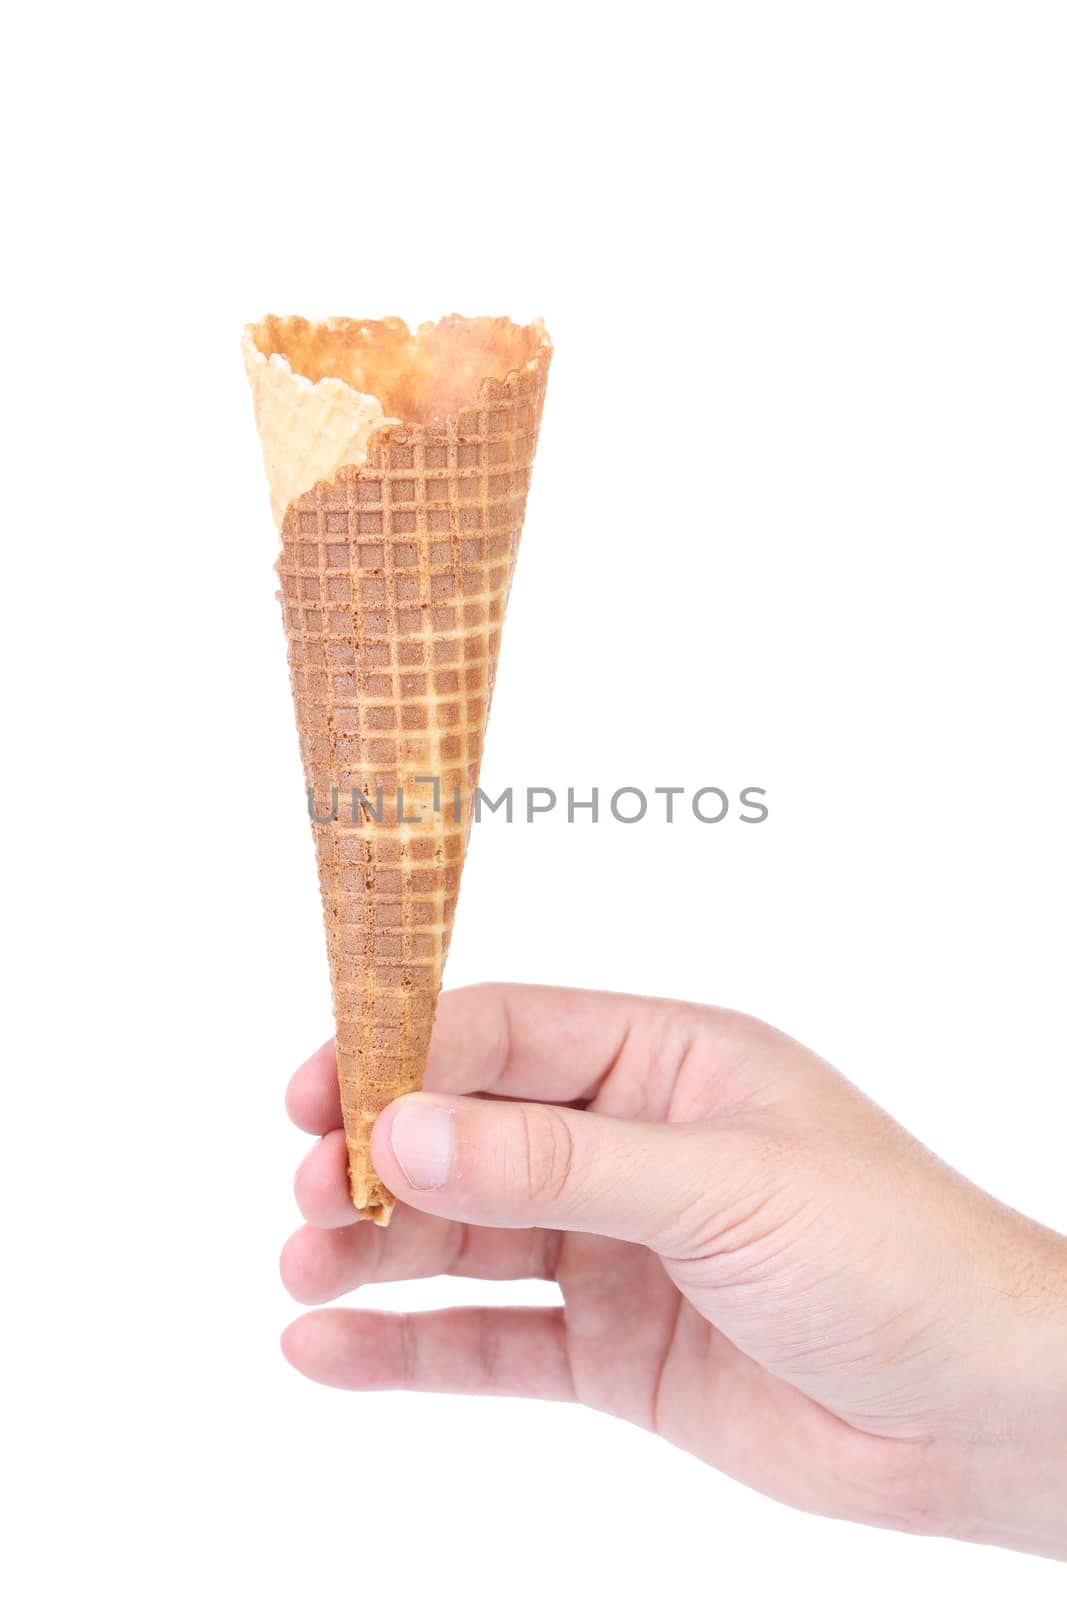 Wafer cup for ice-cream in hand. by indigolotos